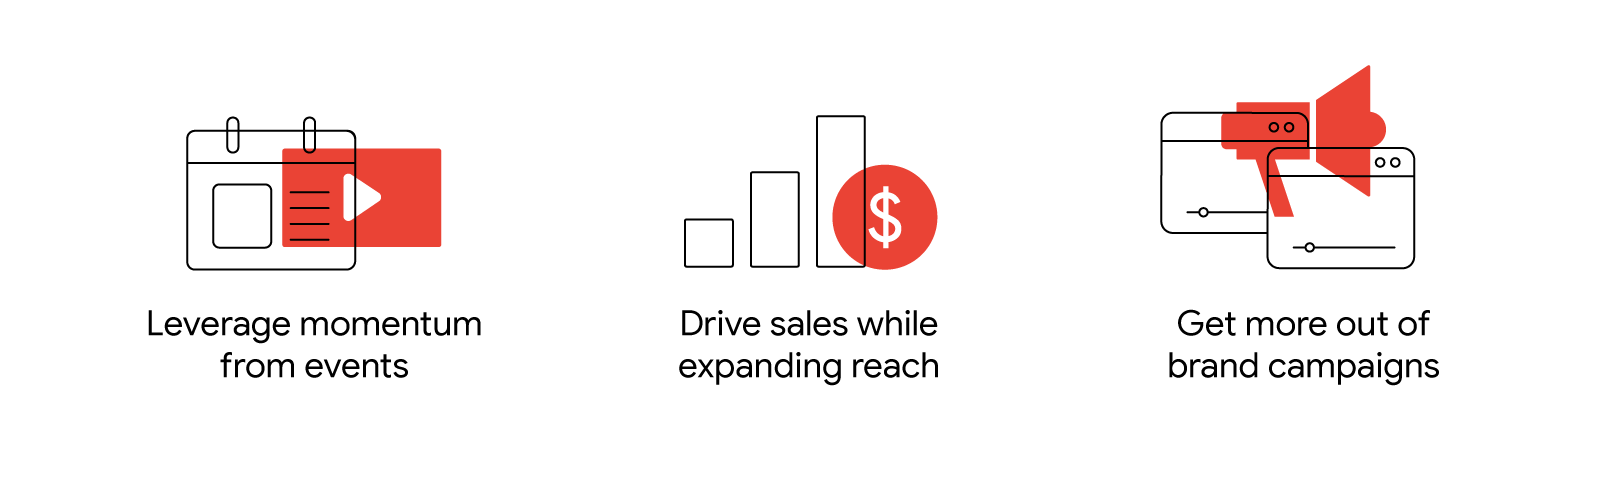 Three ways to embrace a full-funnel YouTube strategy: Leverage momentum from events. Drive sales while expanding reach. Get more out of brand campaigns